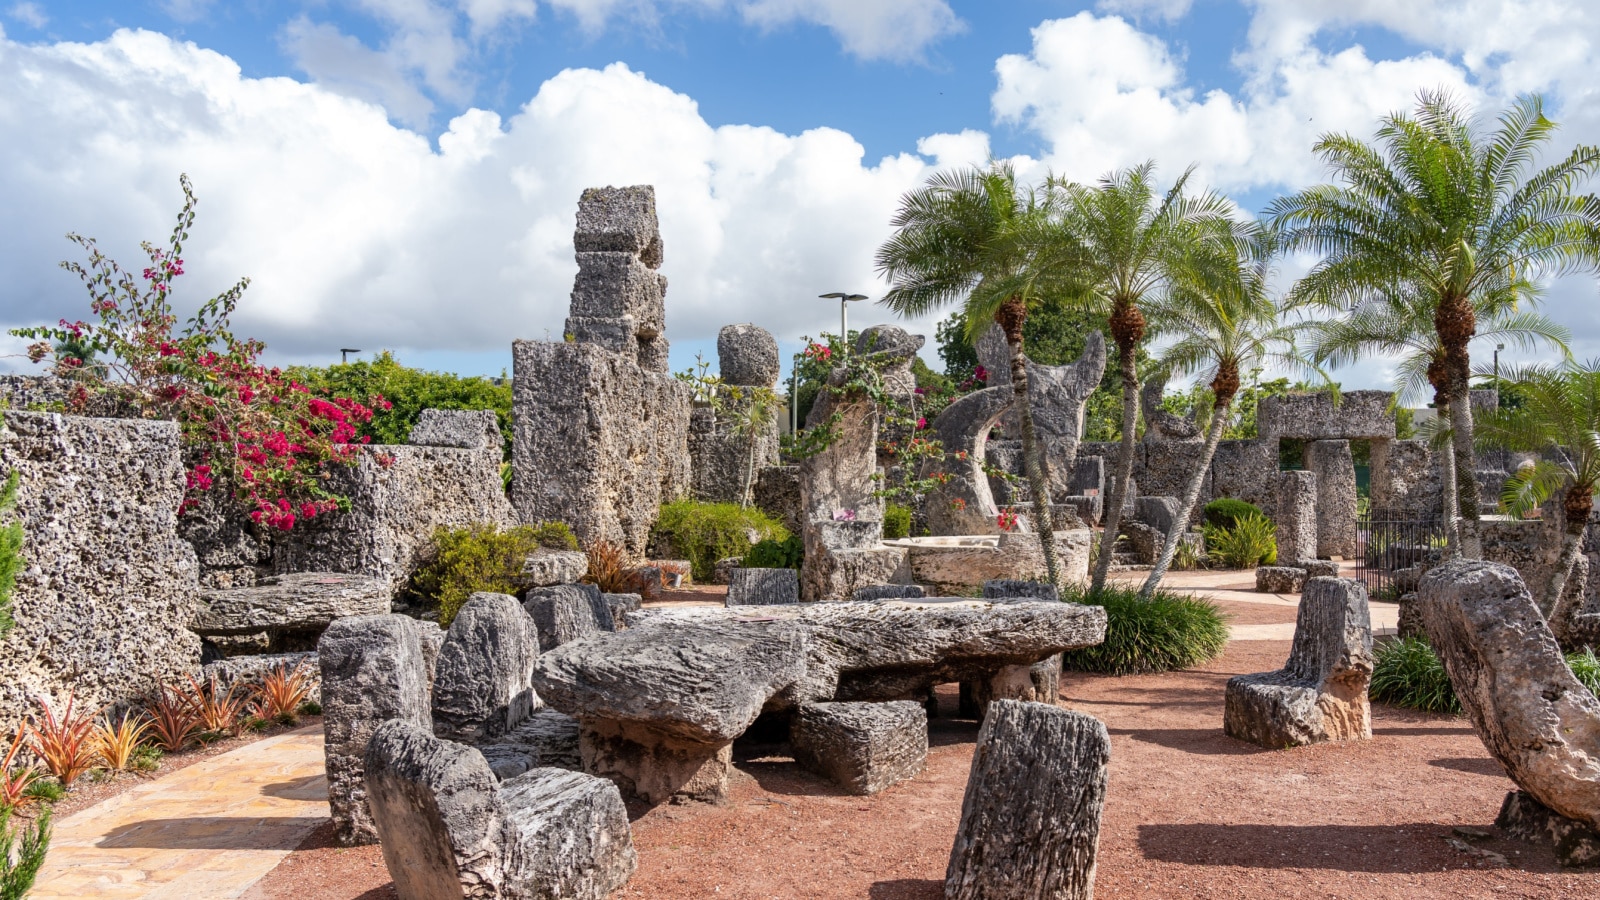 Homestead, FL, USA - January 1, 2022: Coral Castle Museum is shown in Homestead near Miami, FL, USA, an oolite limestone structure created by the Latvian-American eccentric Edward Leedskalnin.